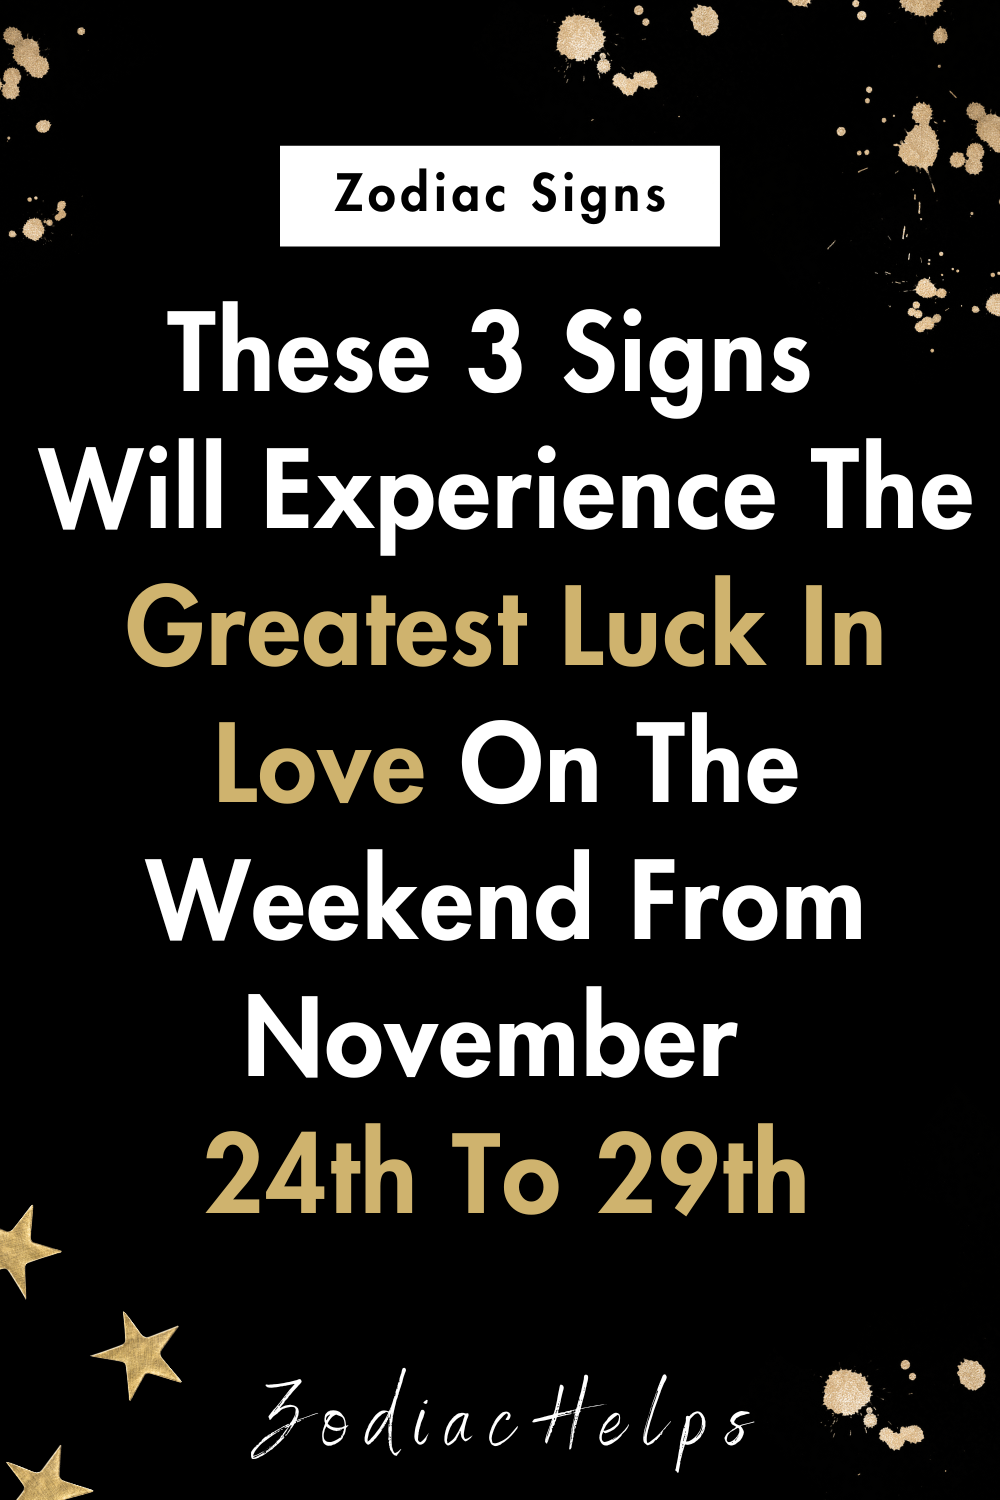 These 3 Signs Will Experience The Greatest Luck In Love On The Weekend From November 24th To 29th